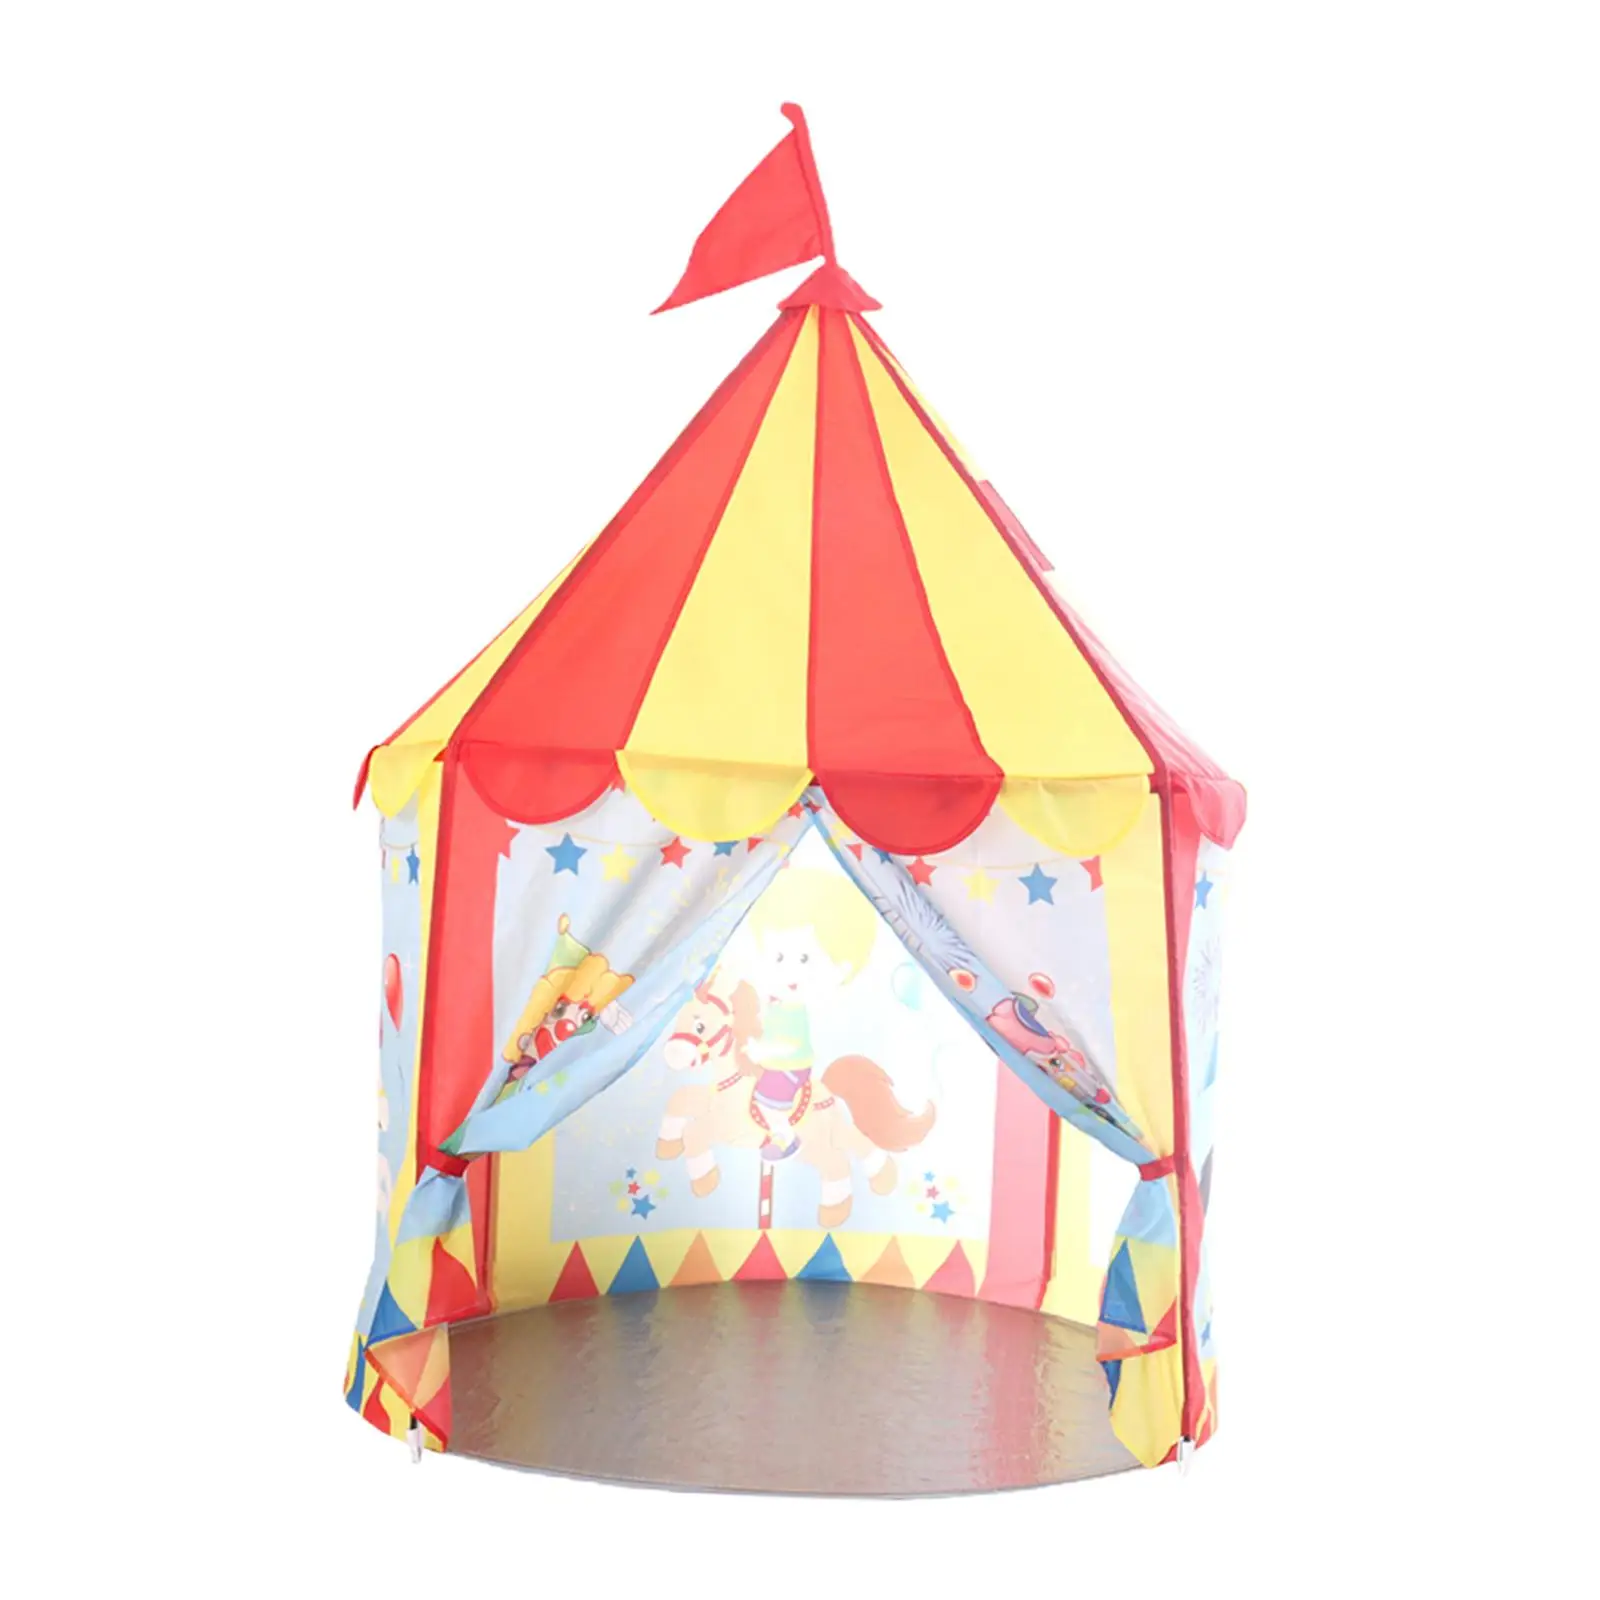 Princess Castle Playhouse Tent Play Tent for Boys Girls, Easy to Assemble, Play Teepee for Yard